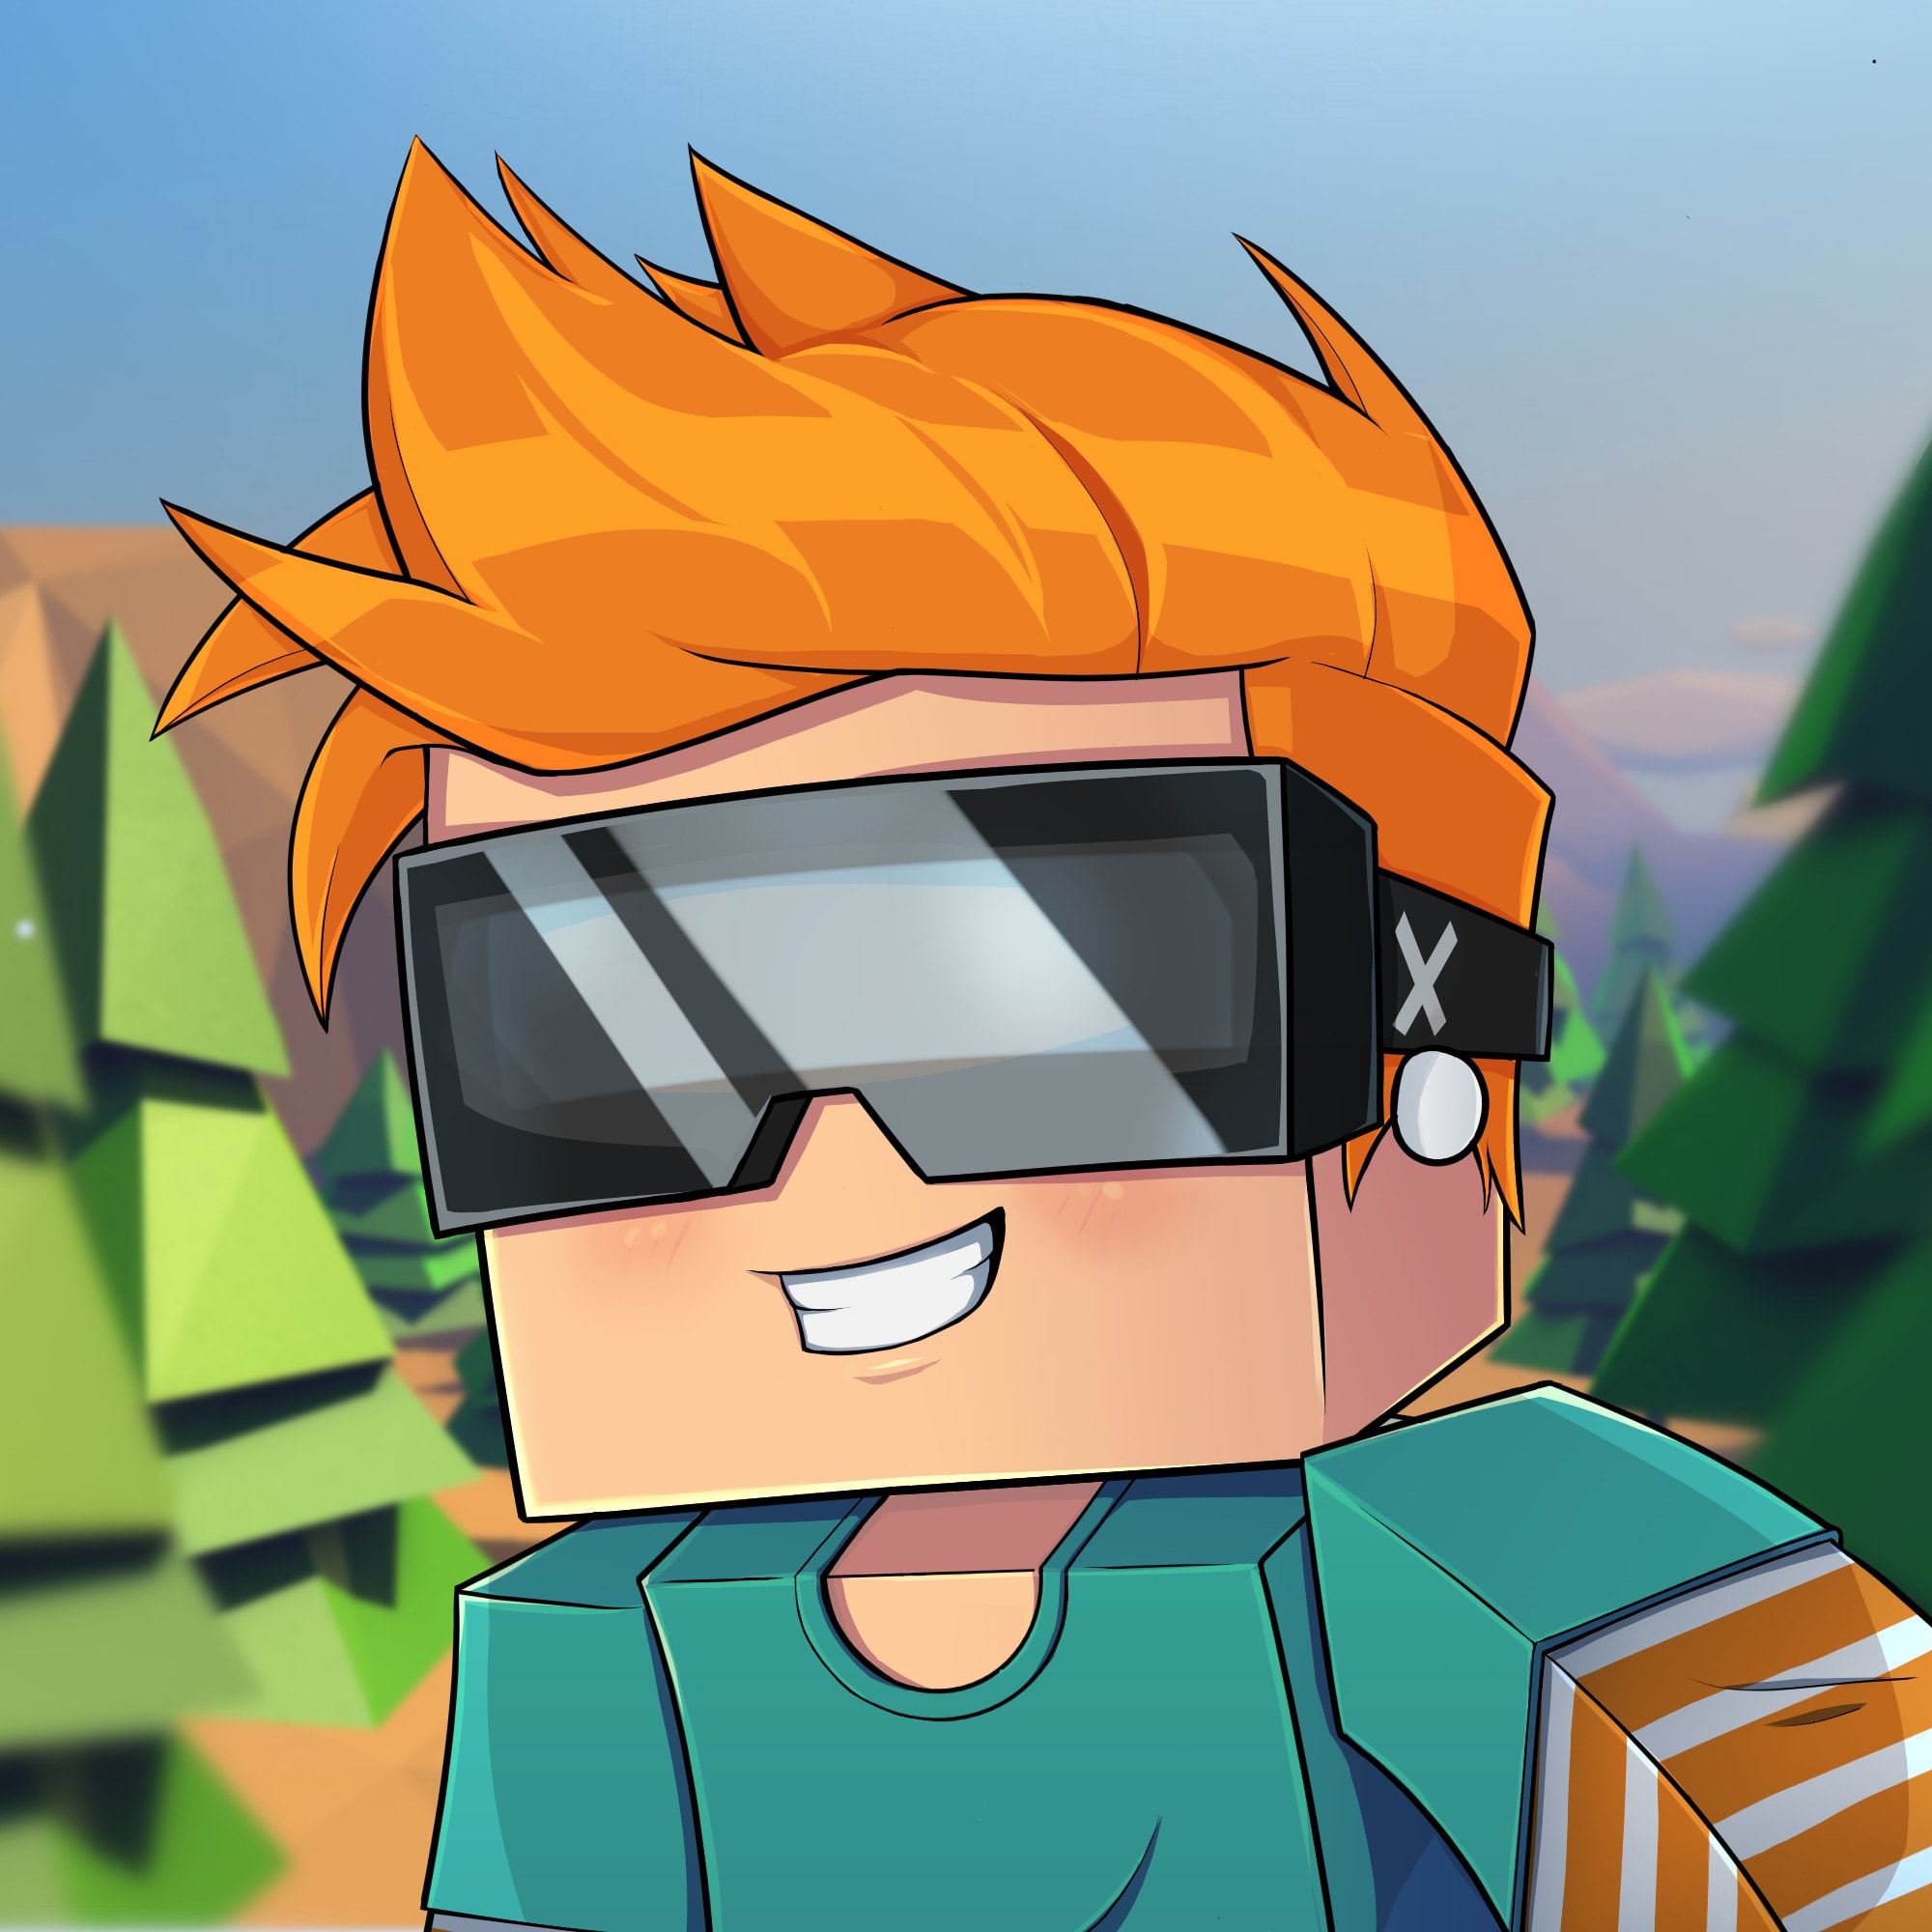 Draw Your Minecraft Or Roblox Character For A Cheap Price By Eeediejay - buy this and ill draw your character roblox